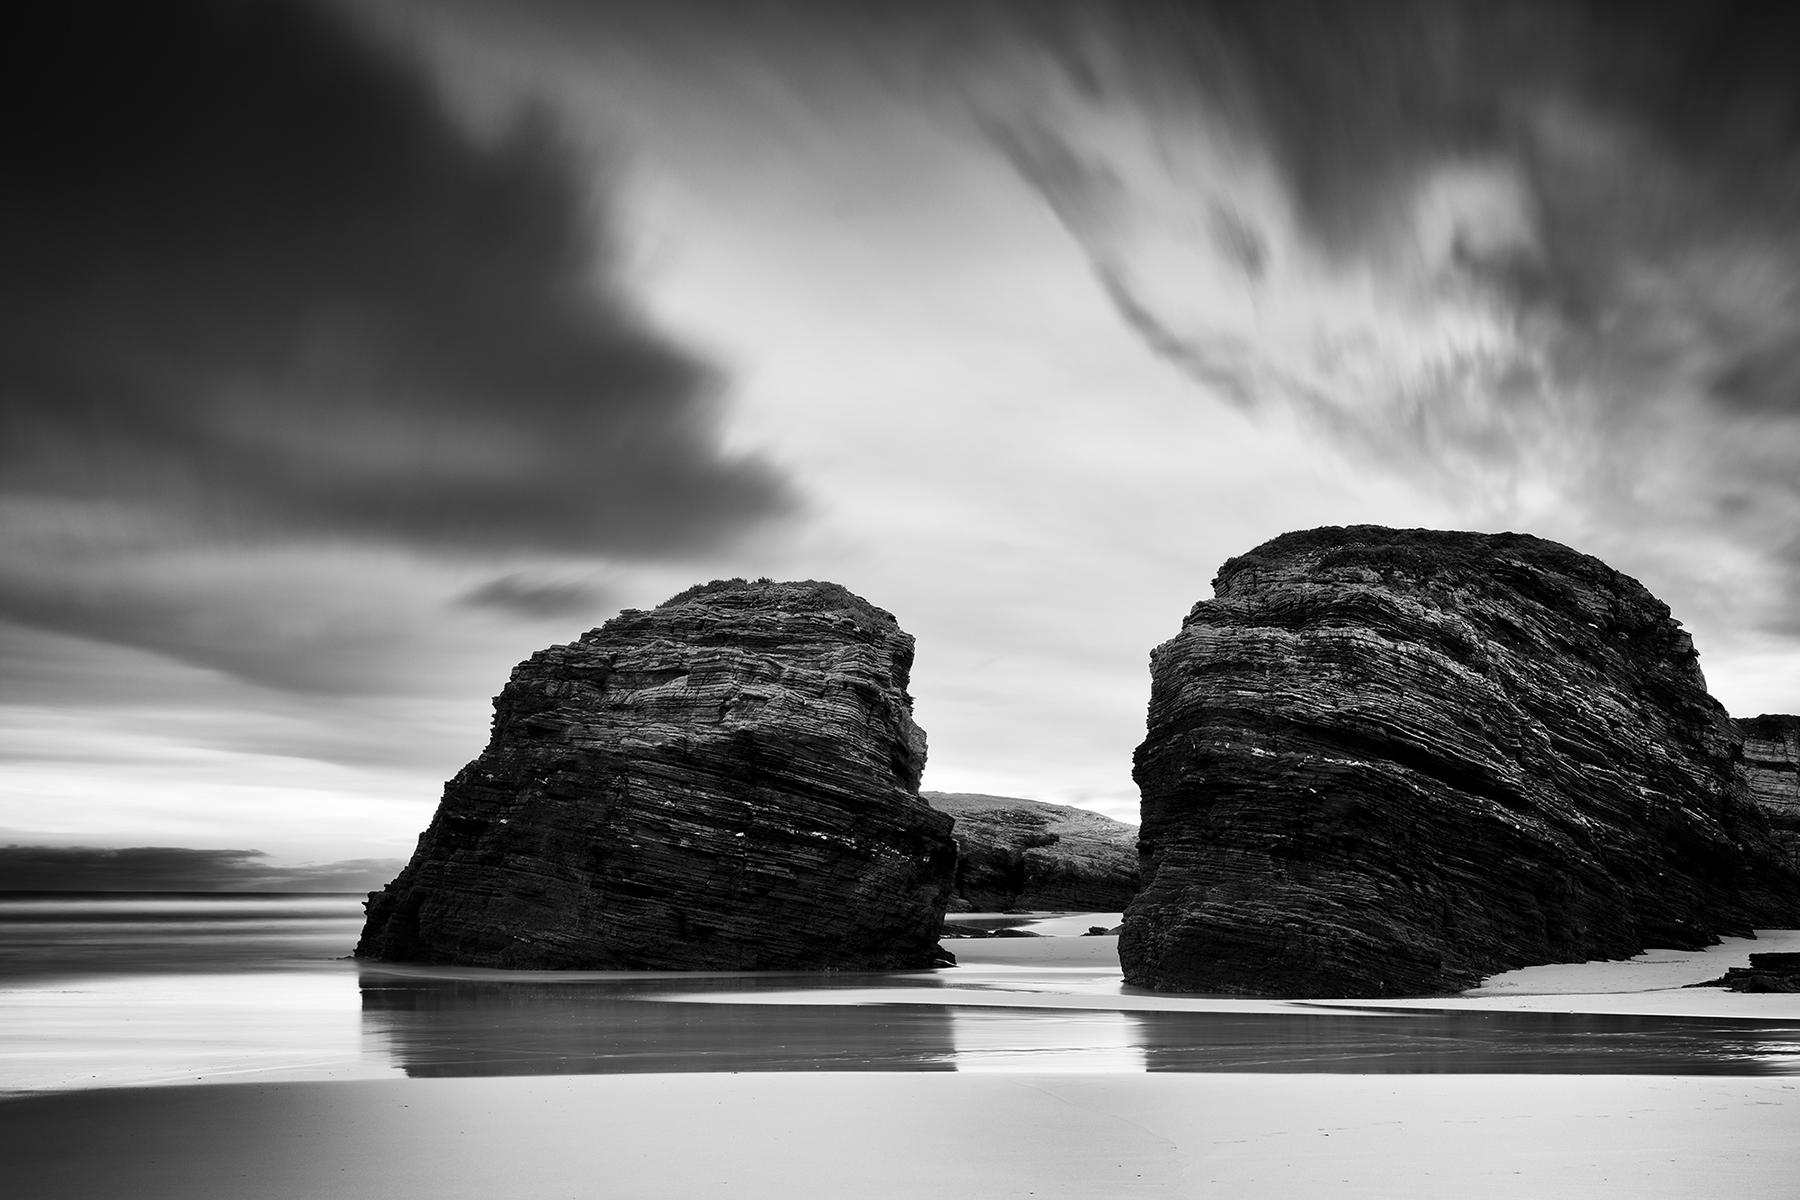 Gerald Berghammer Black and White Photograph - As Catedrais Beach, giant rocks, black and white fine art landscape photography